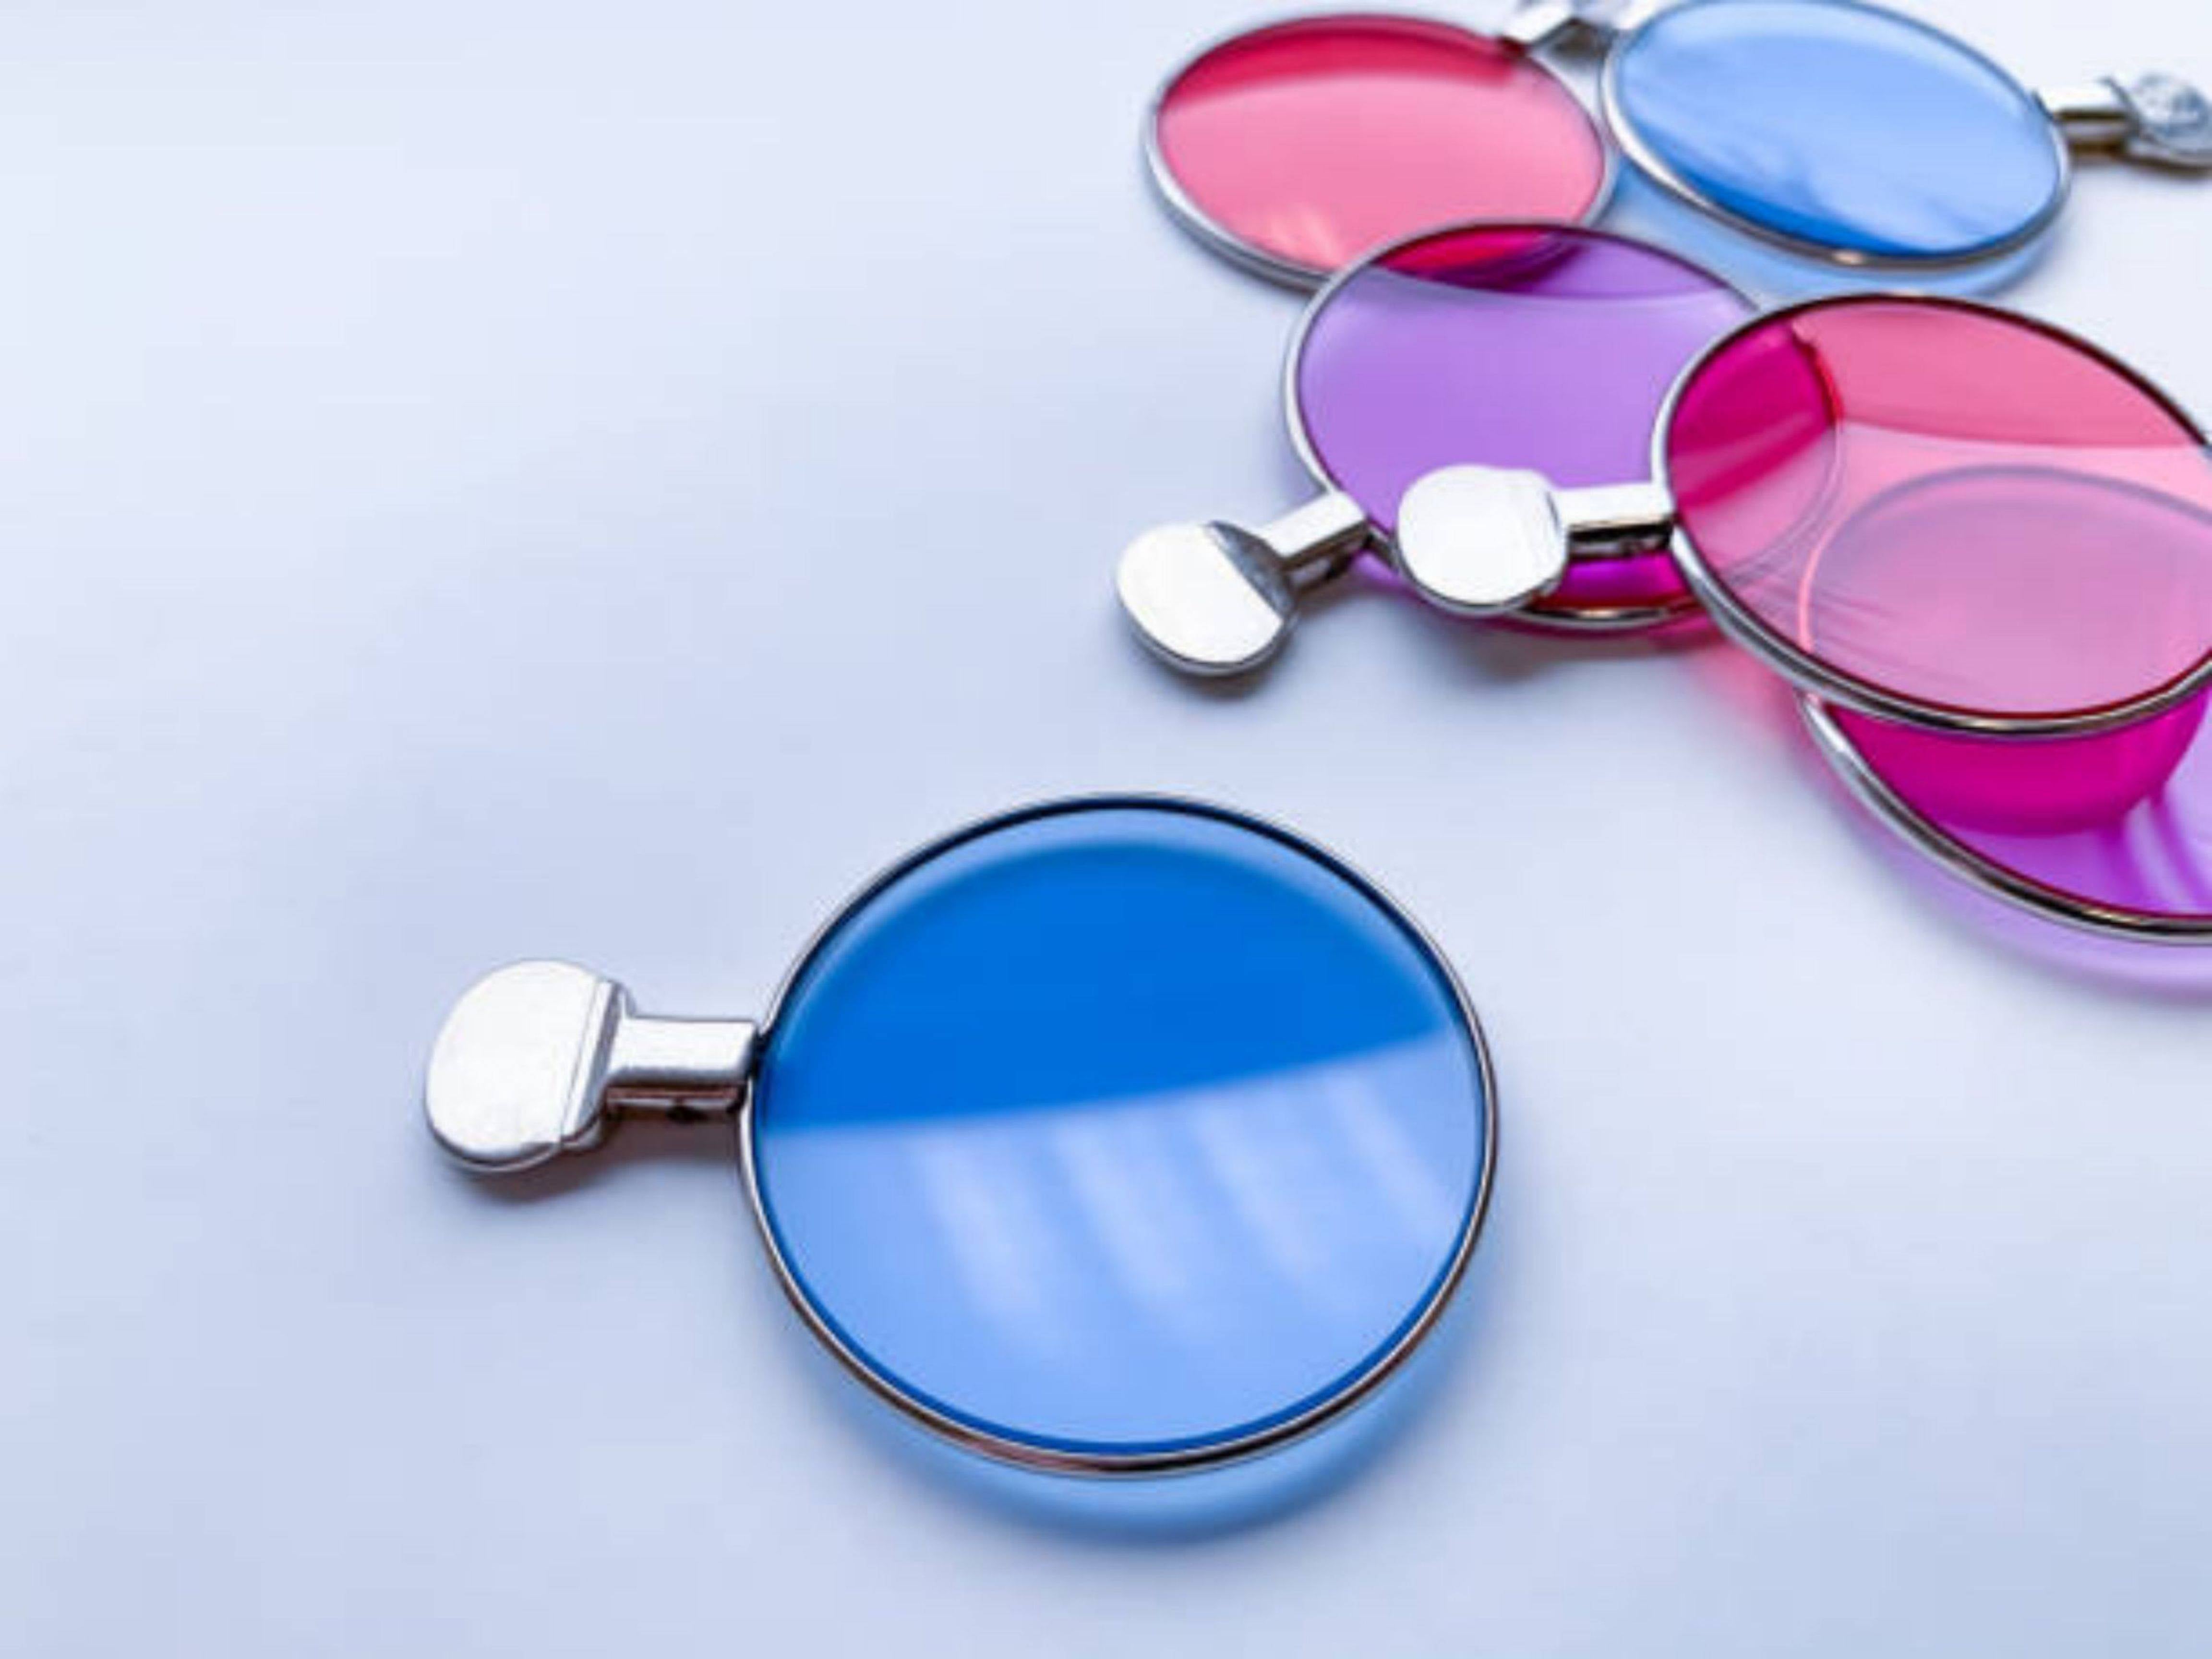 What is the difference between resin lenses and glass lenses